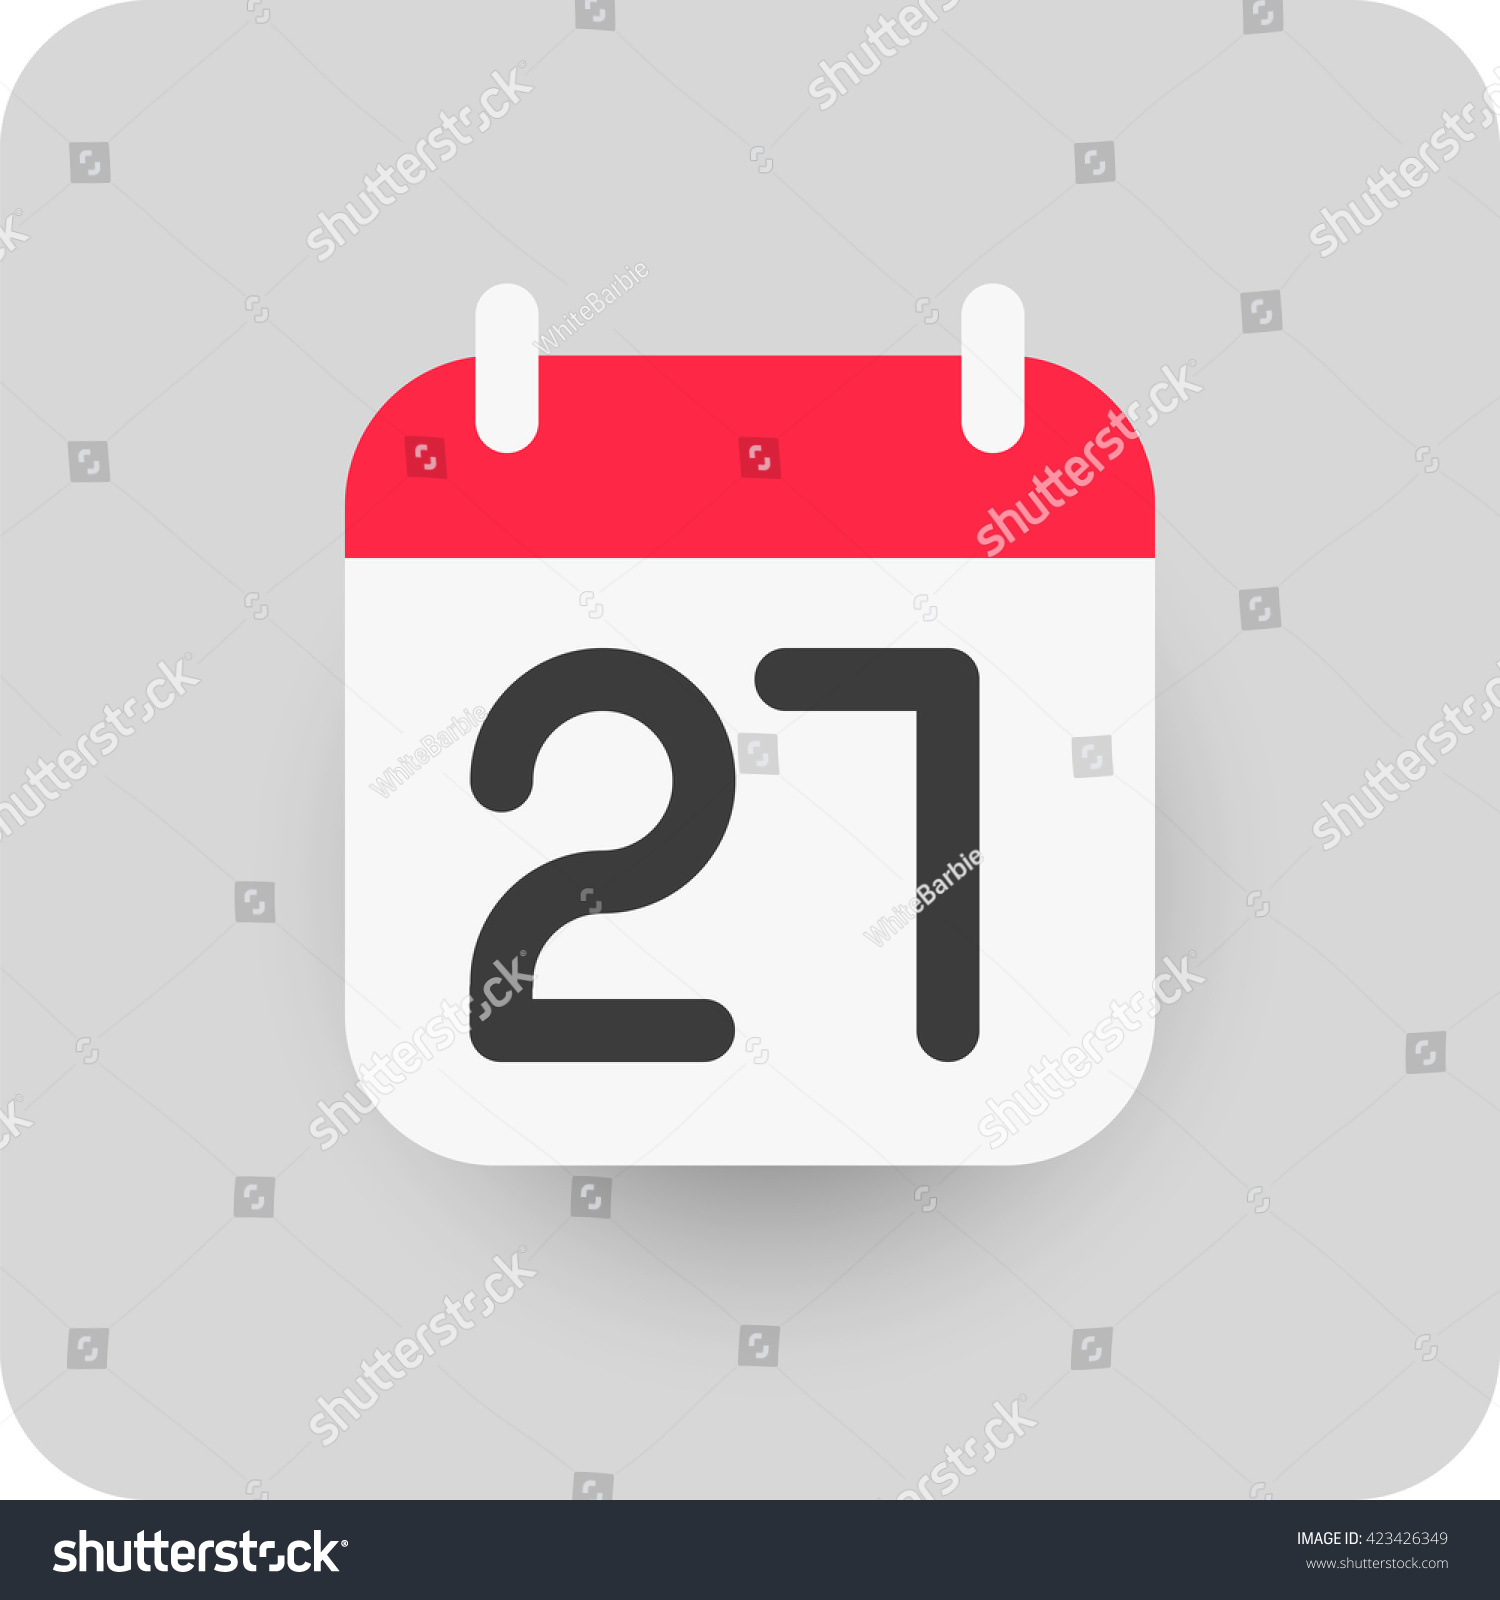 SVG of Calendar vector icon. Simple flat calendar with date 27. svg